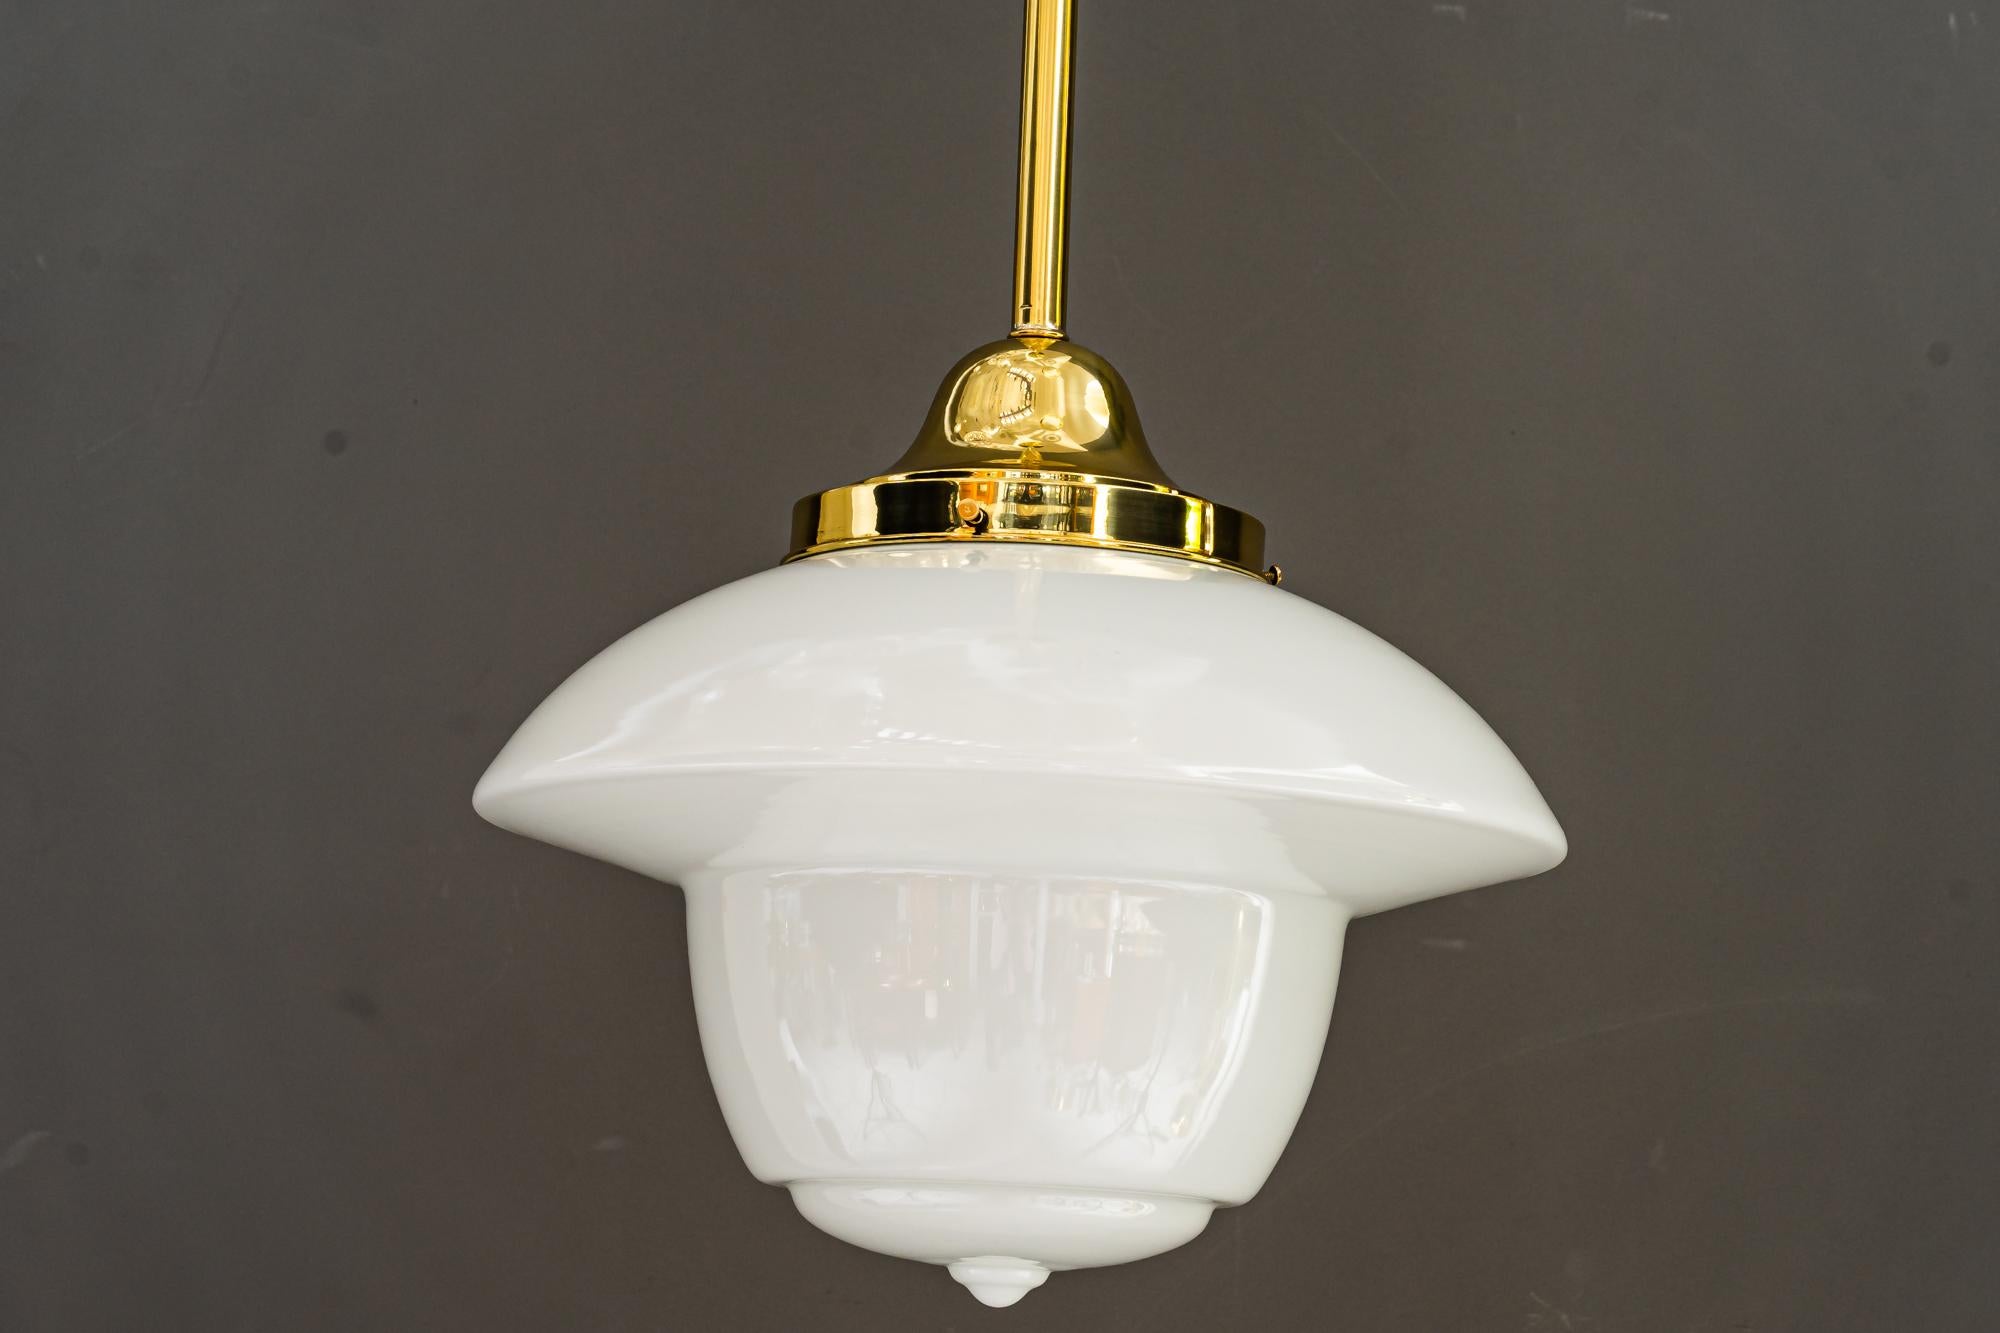 Art Deco pendant Vienna around 1920s
Brass polished and stove enamelled
Original glass shade.